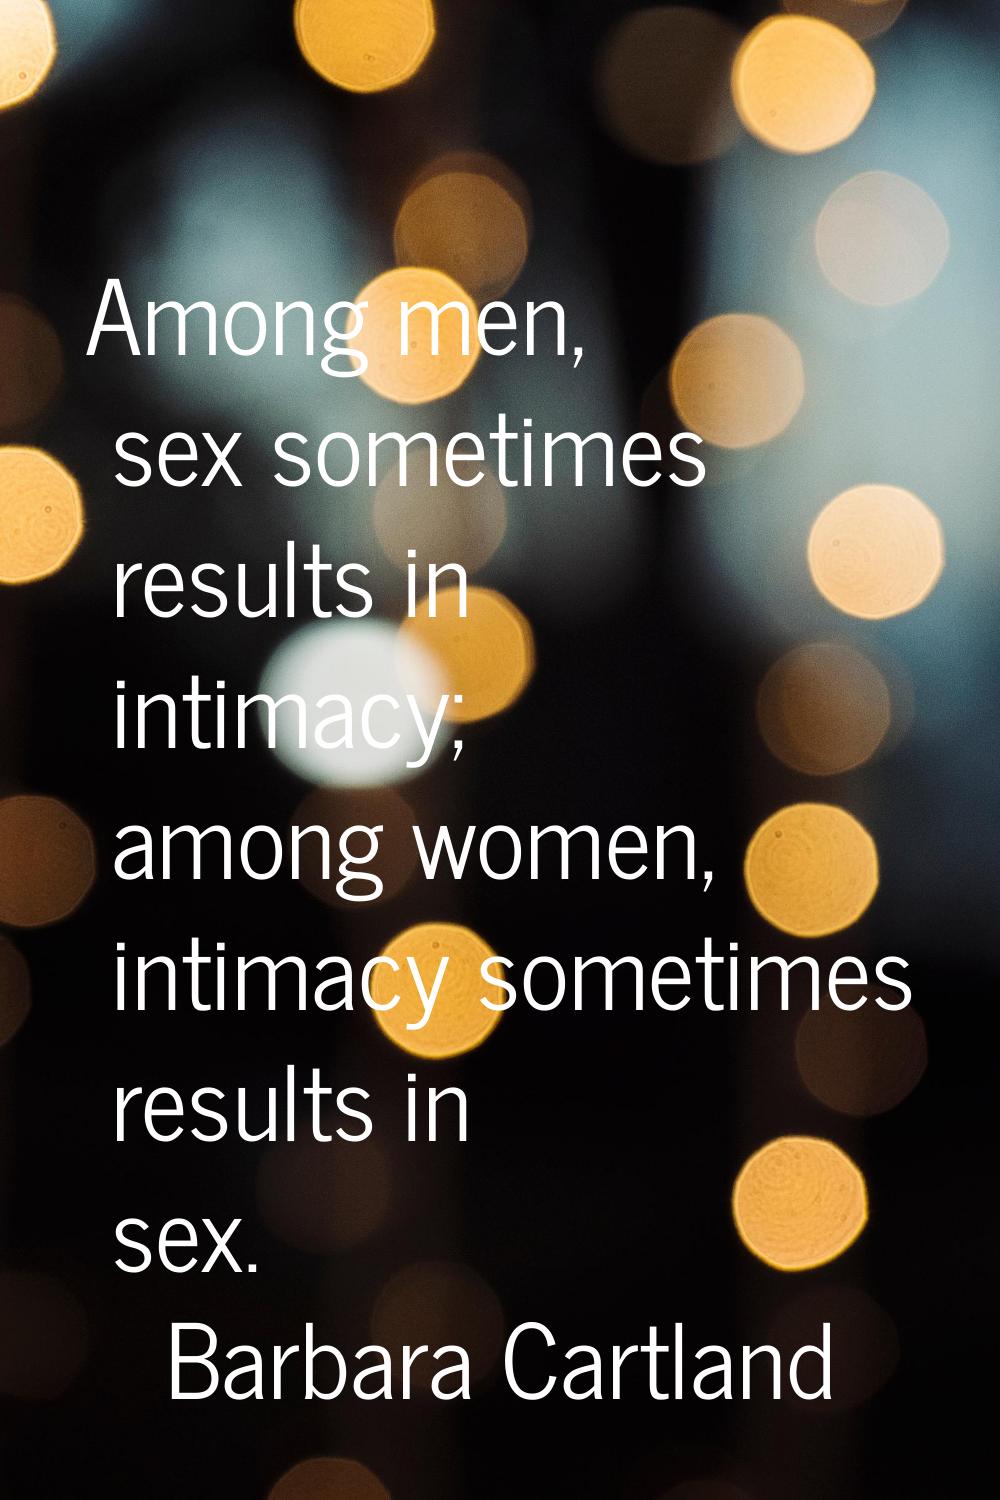 Among men, sex sometimes results in intimacy; among women, intimacy sometimes results in sex.